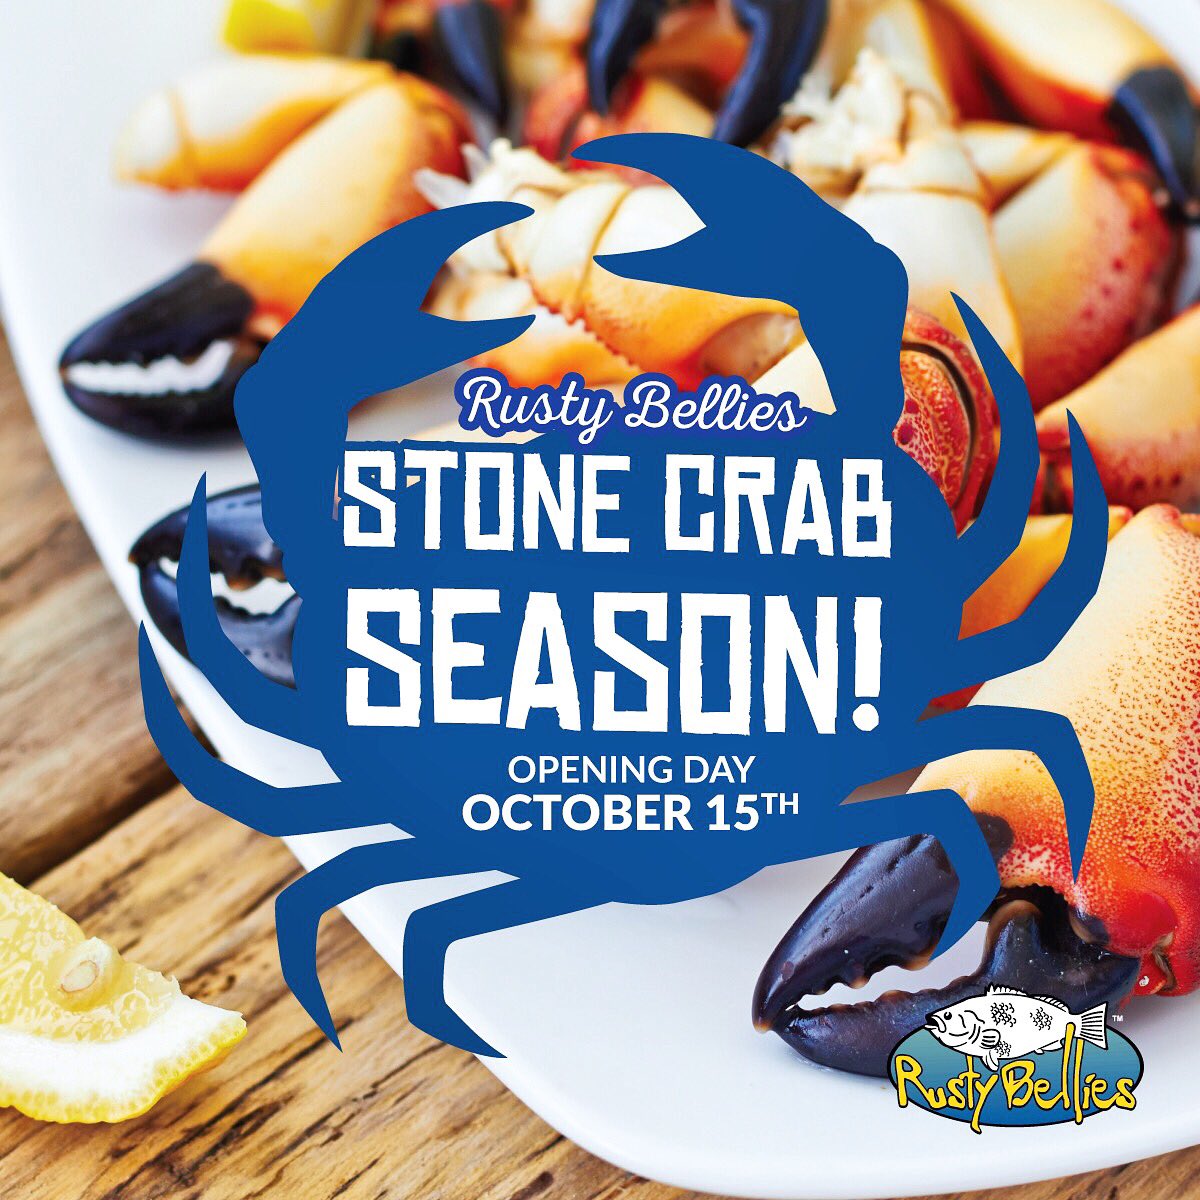 The Stone Crabs Are Coming!! 🦀🦀🦀 #boat2bellie #tarponsprings #stonecrabseason